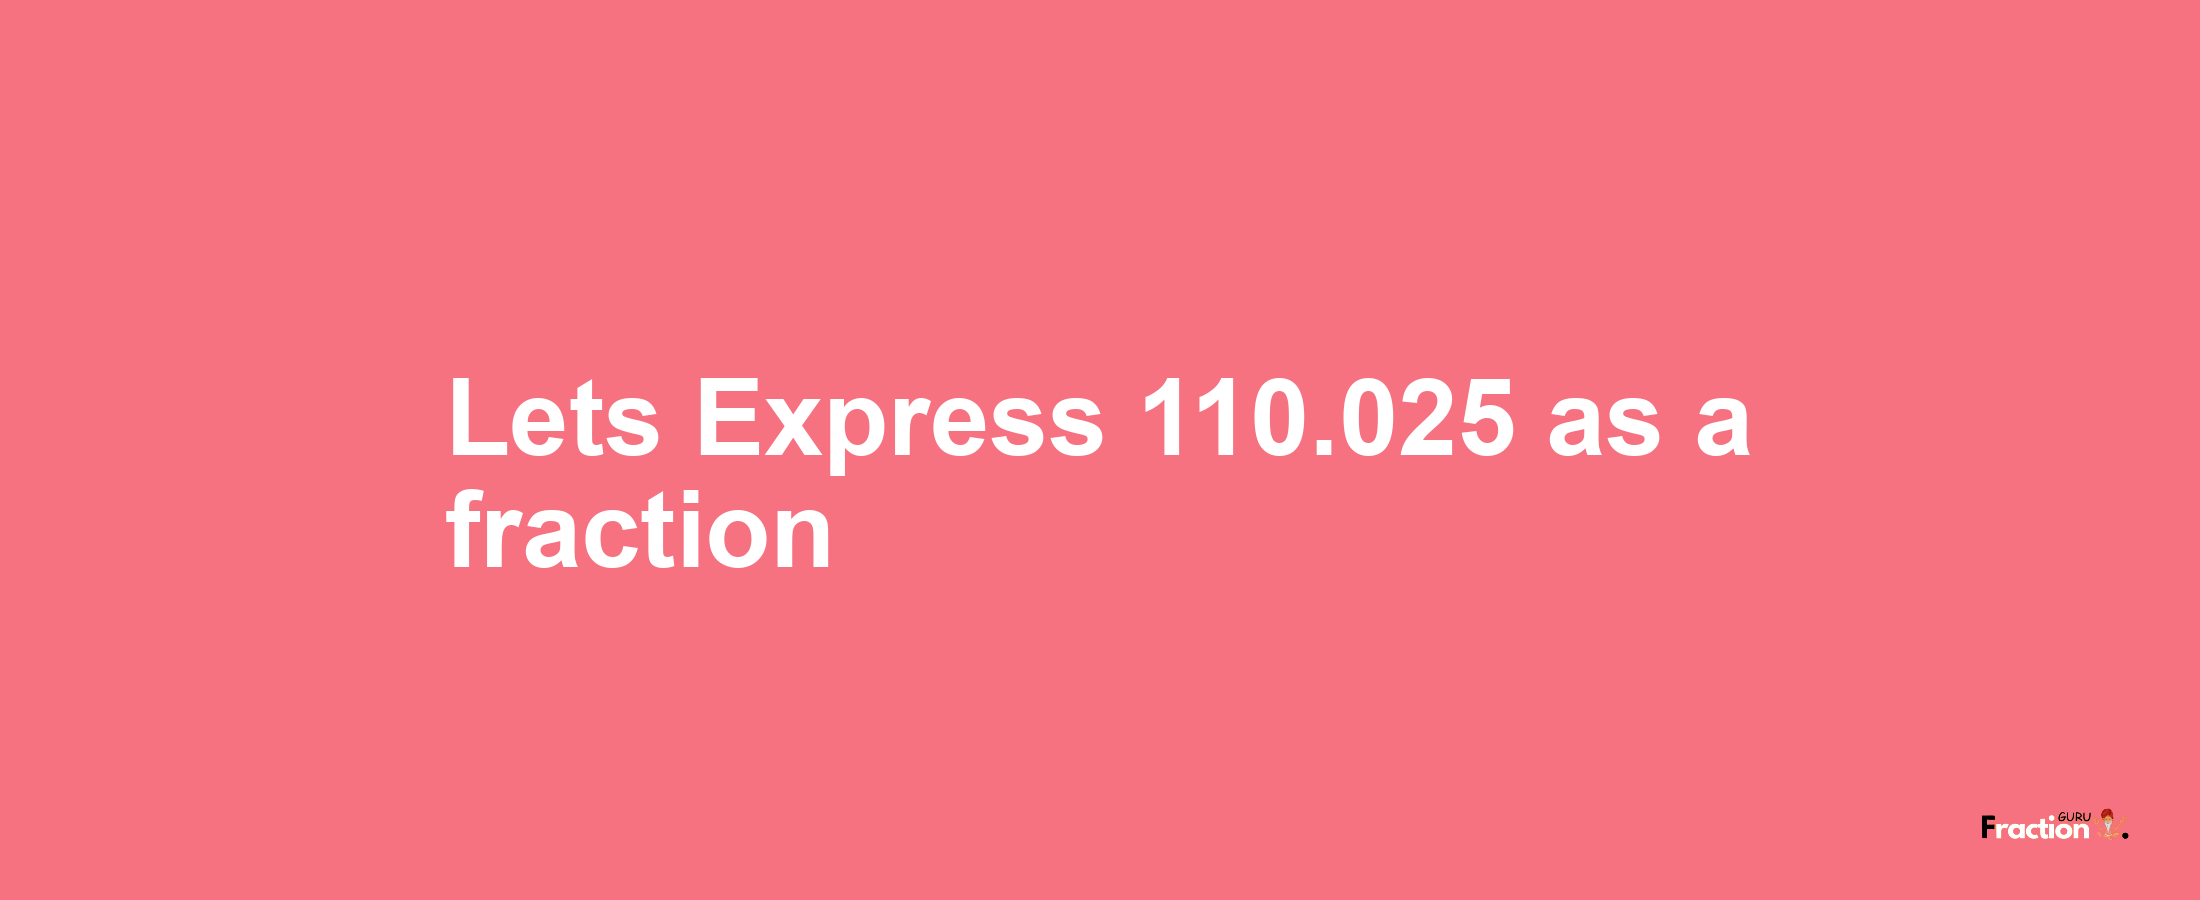 Lets Express 110.025 as afraction